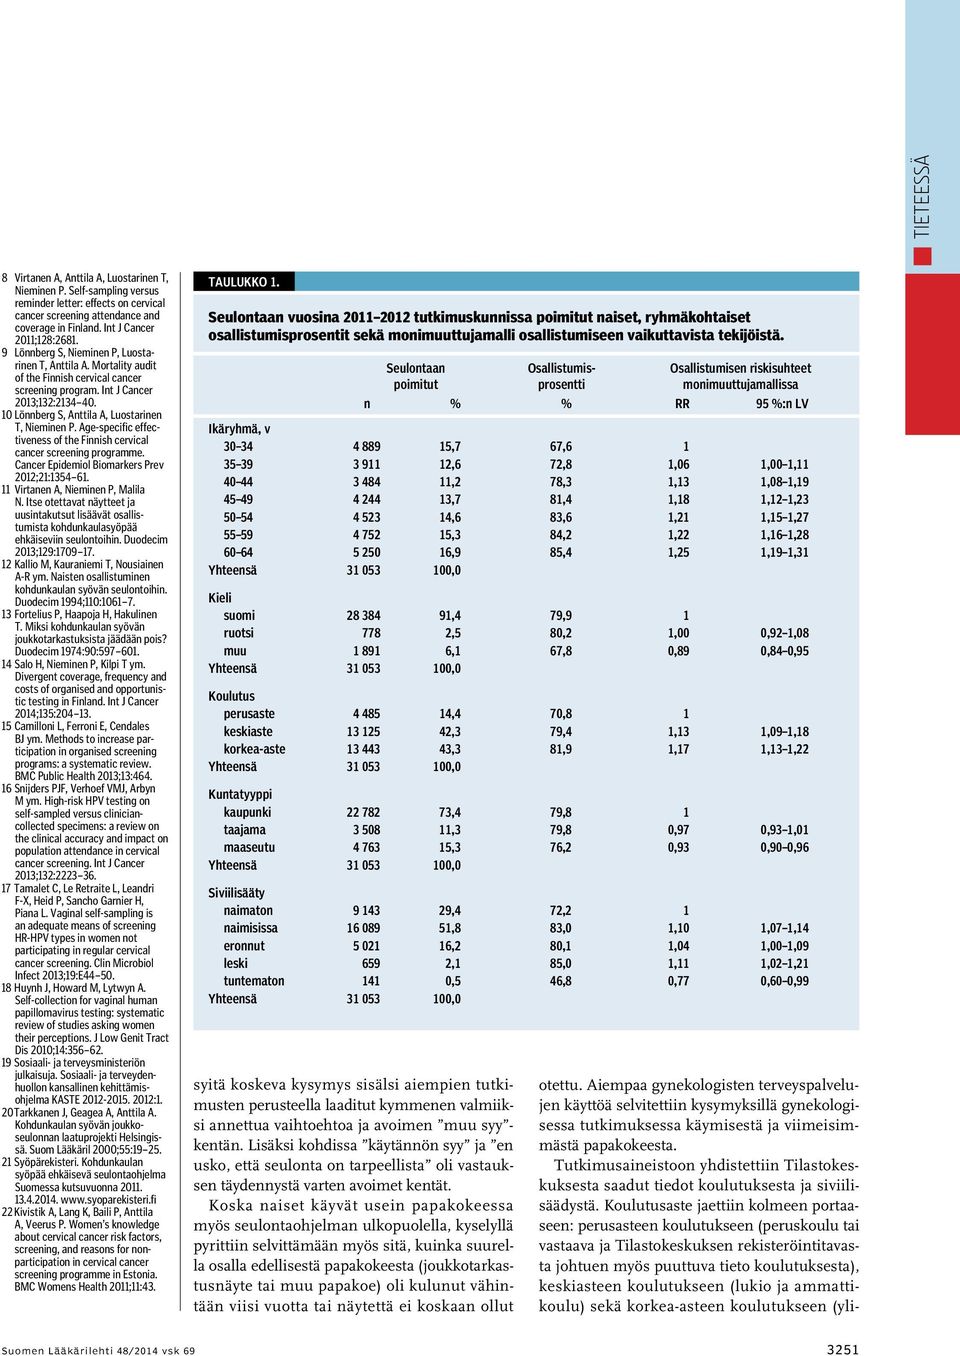 10 Lönnberg S, Anttila A, Luostarinen T, Nieminen P. Age-specific effectiveness of the Finnish cervical cancer screening programme. Cancer Epidemiol Biomarkers Prev 2012;21:1354 61.